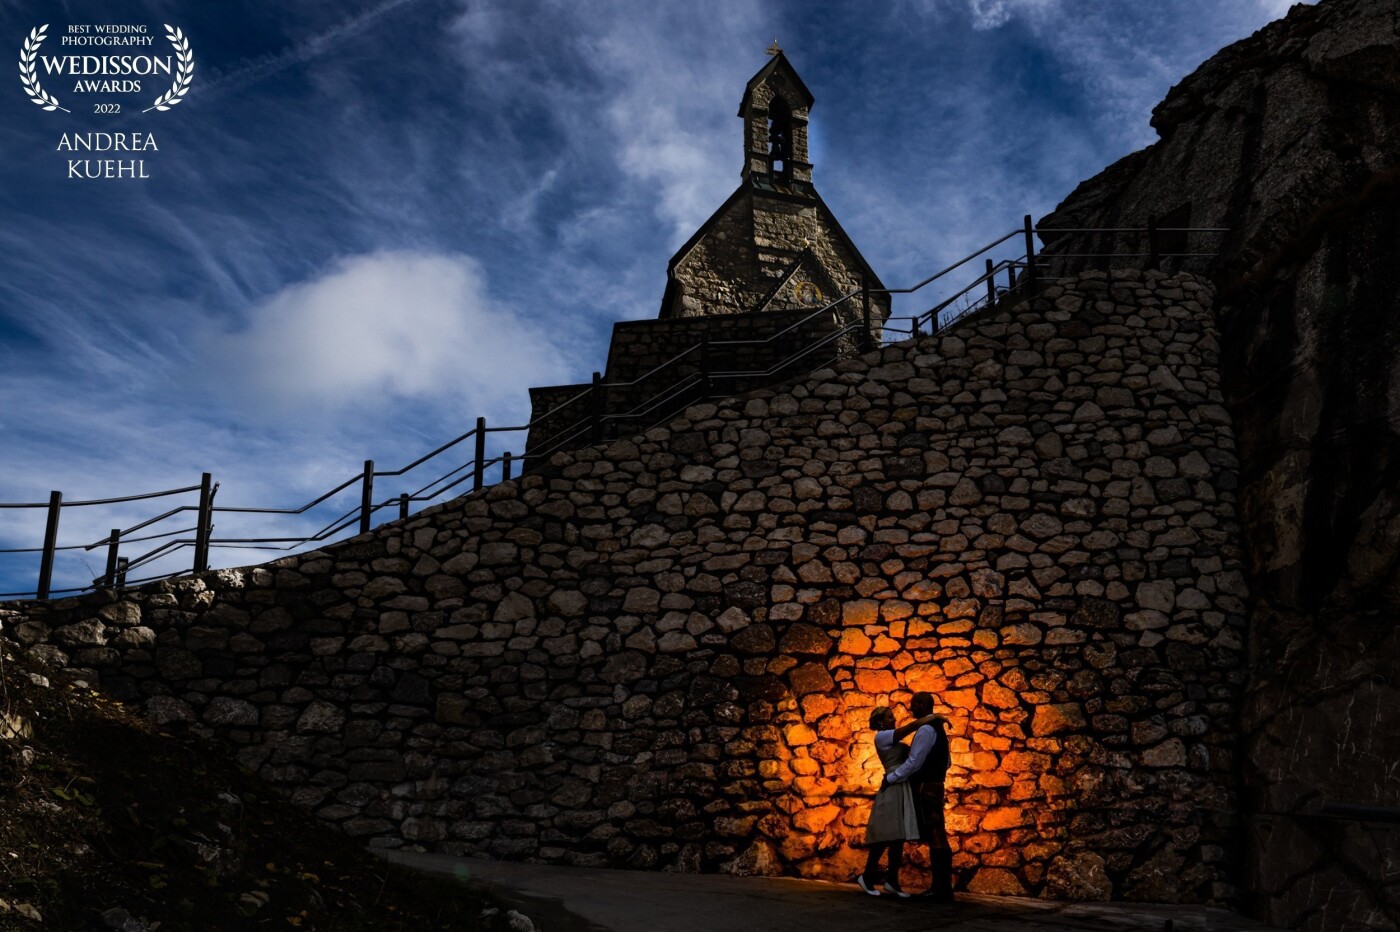 A wedding couple at Wendelstein in the bavarian mountains.